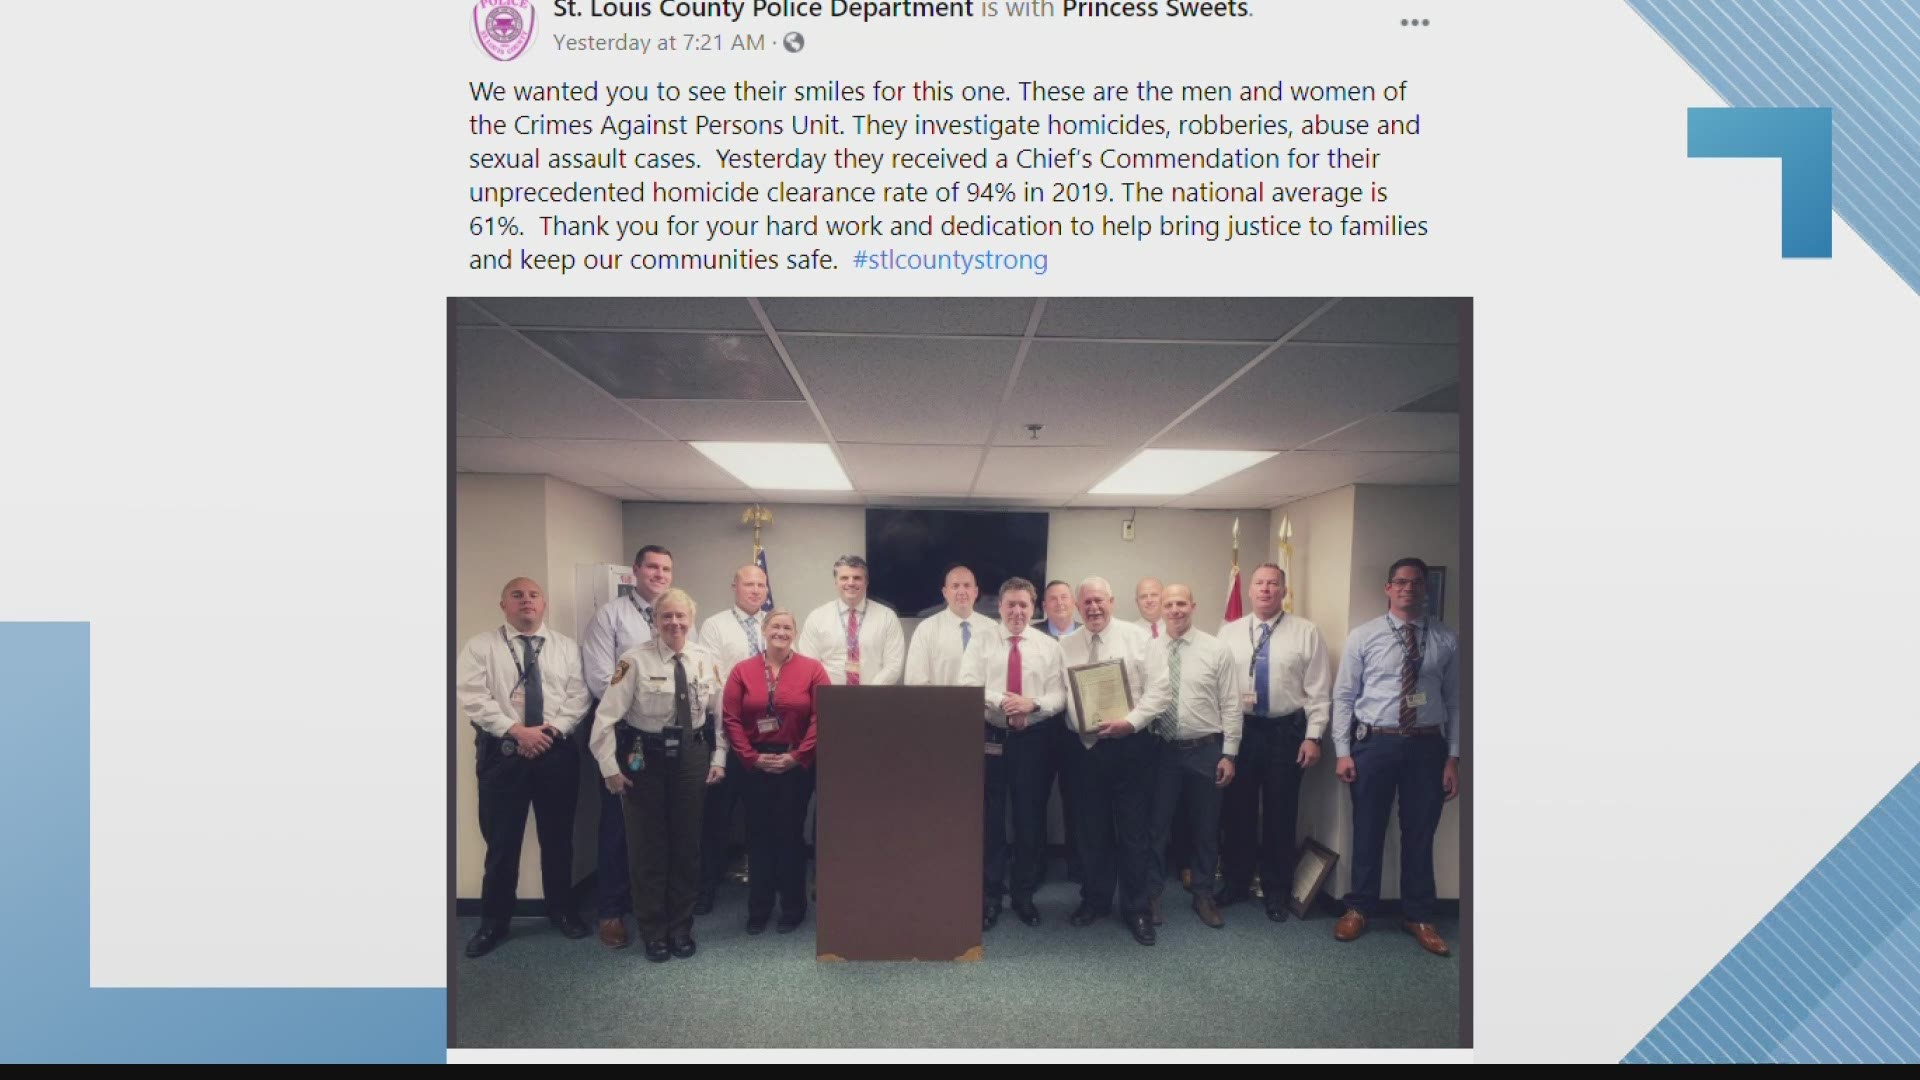 Some people say diversity is missing from the St. Louis County Police Department Facebook post